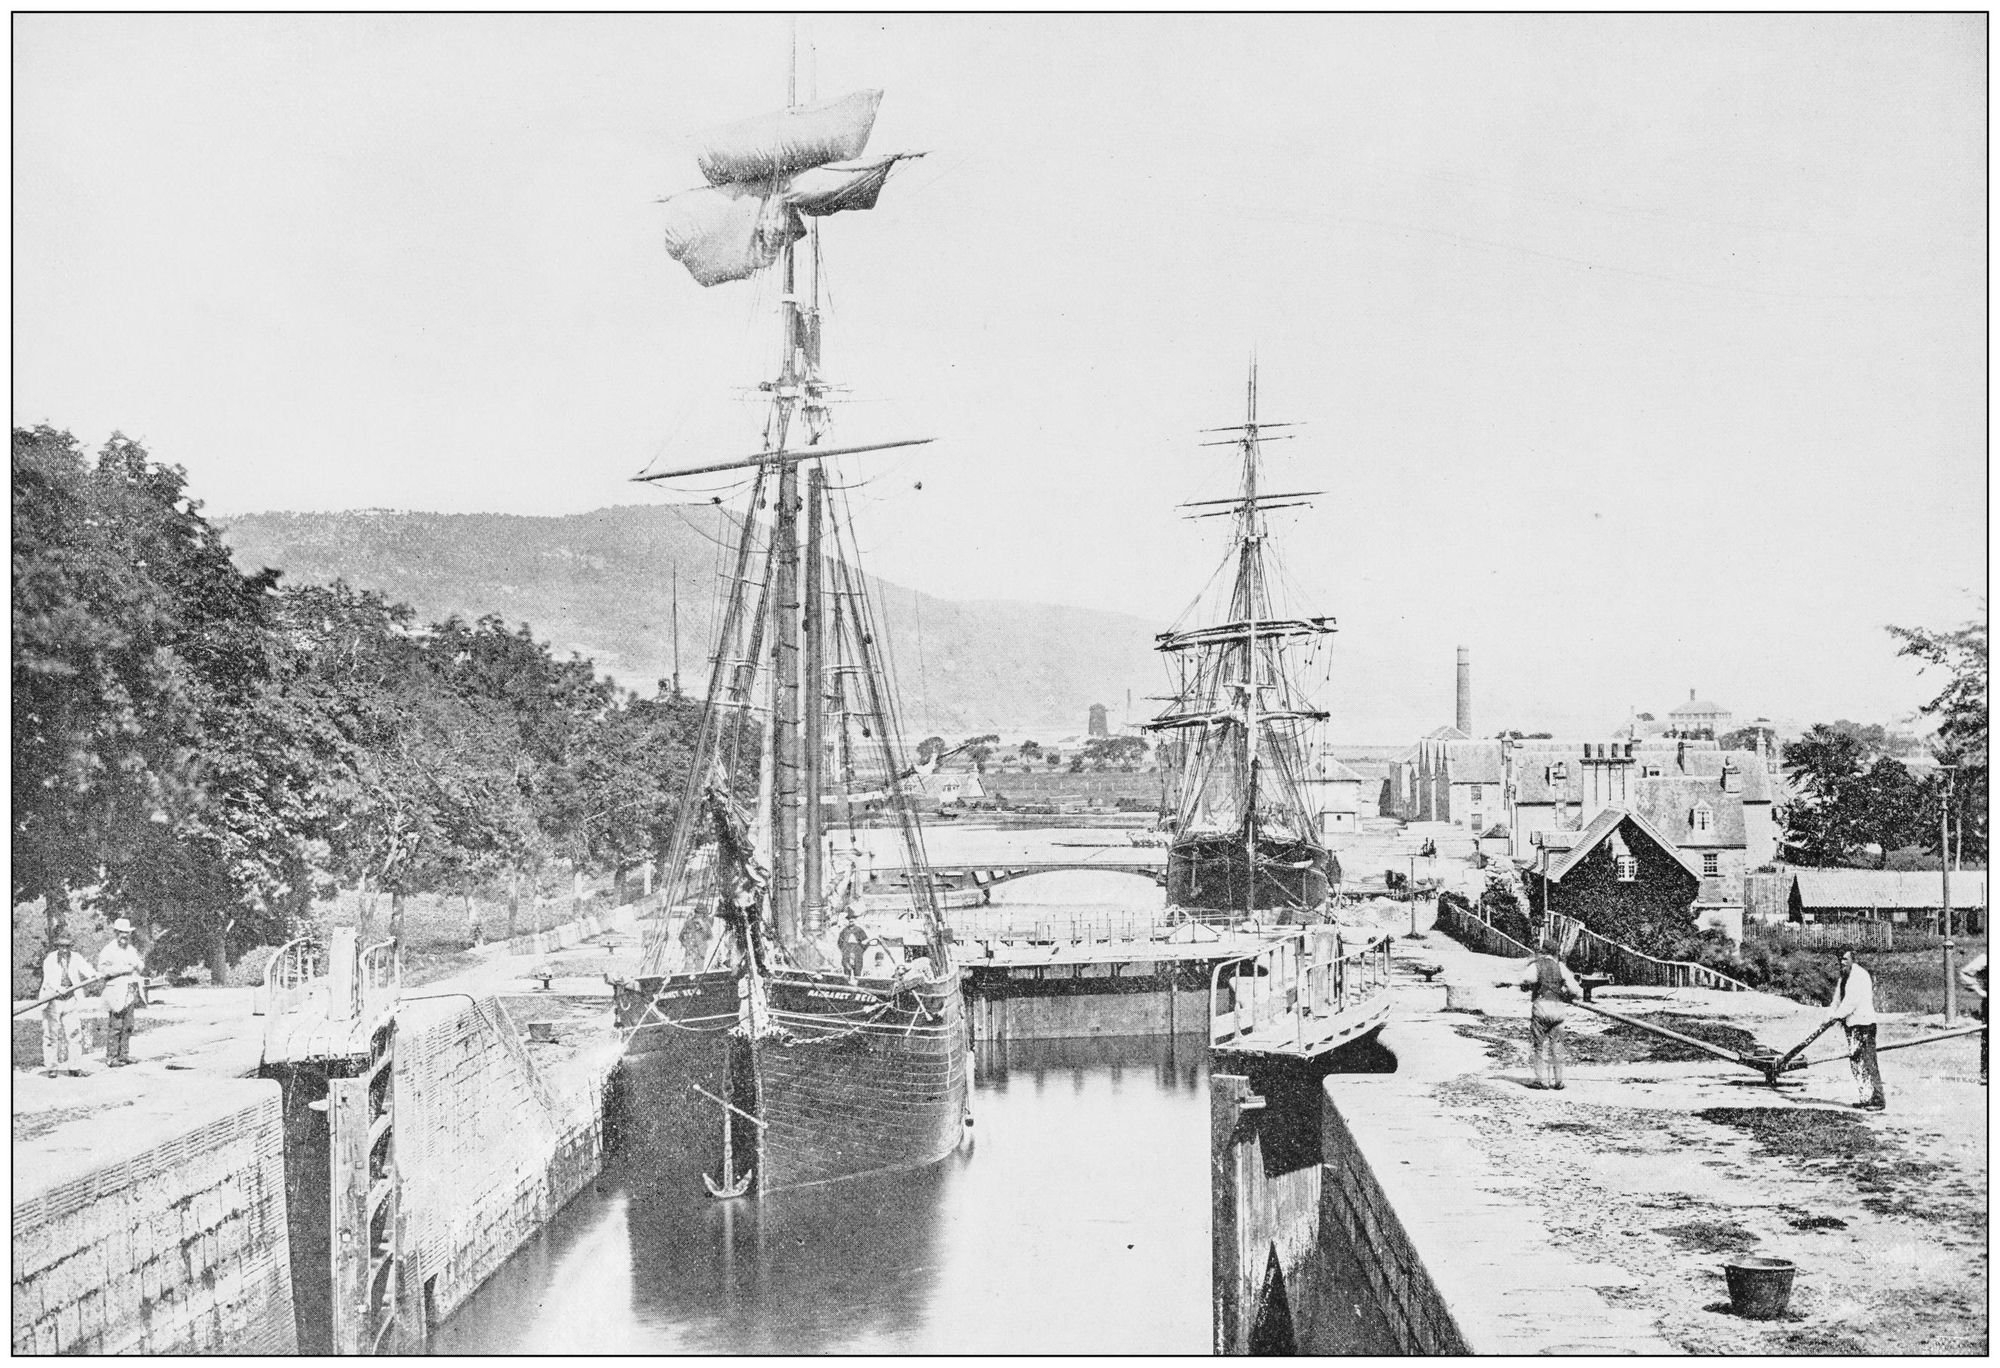 An antique photo of some boats docked in Muirton, on the Caledonian Canal. Photo: Getty